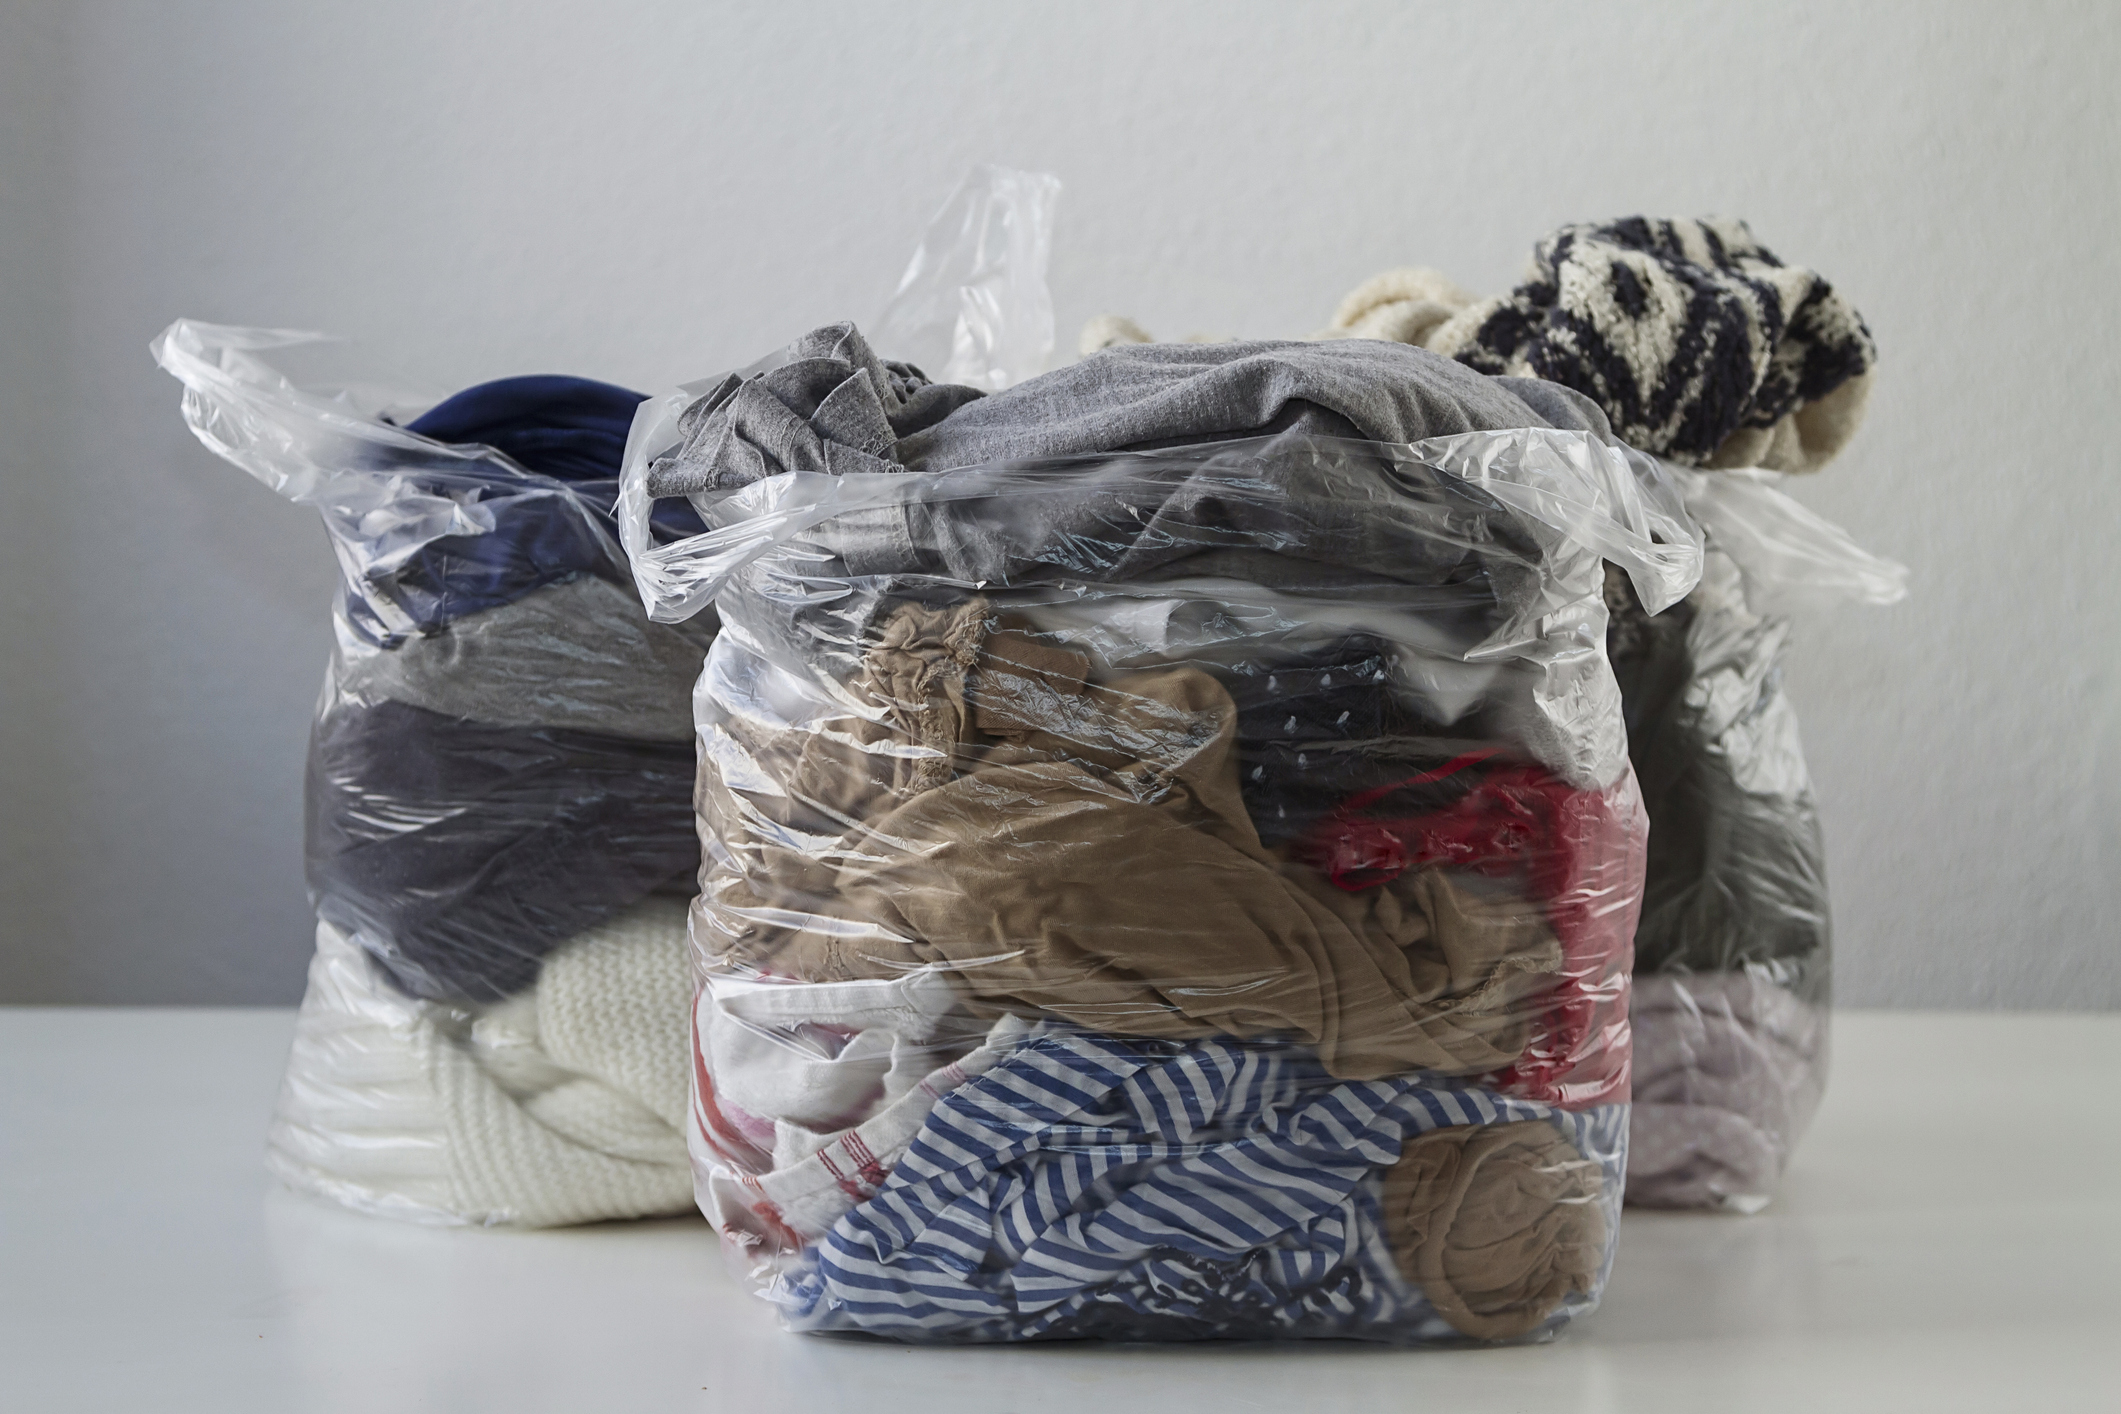 Where to recycle used unwanted fabric in Vancouver - Vancouver Is Awesome